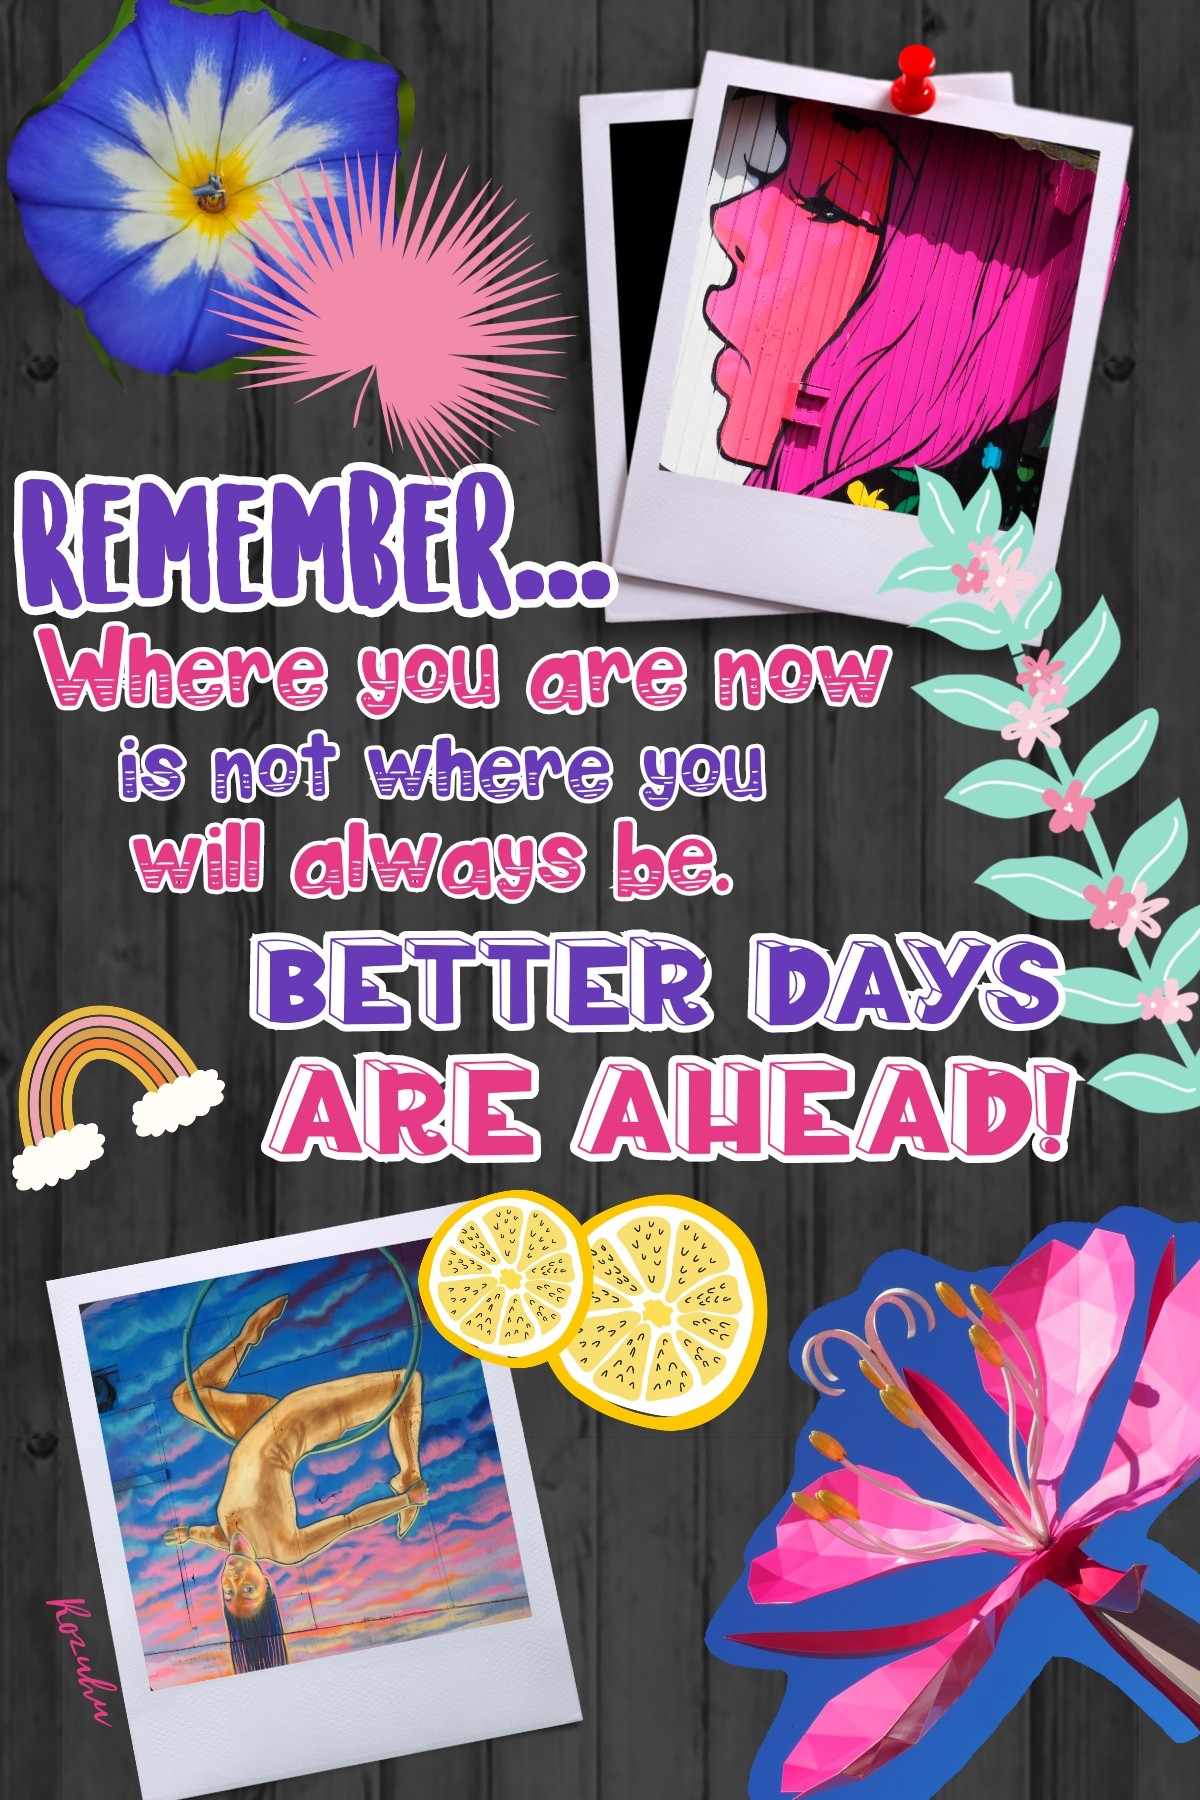 Better days are ahead! 💗💗💗